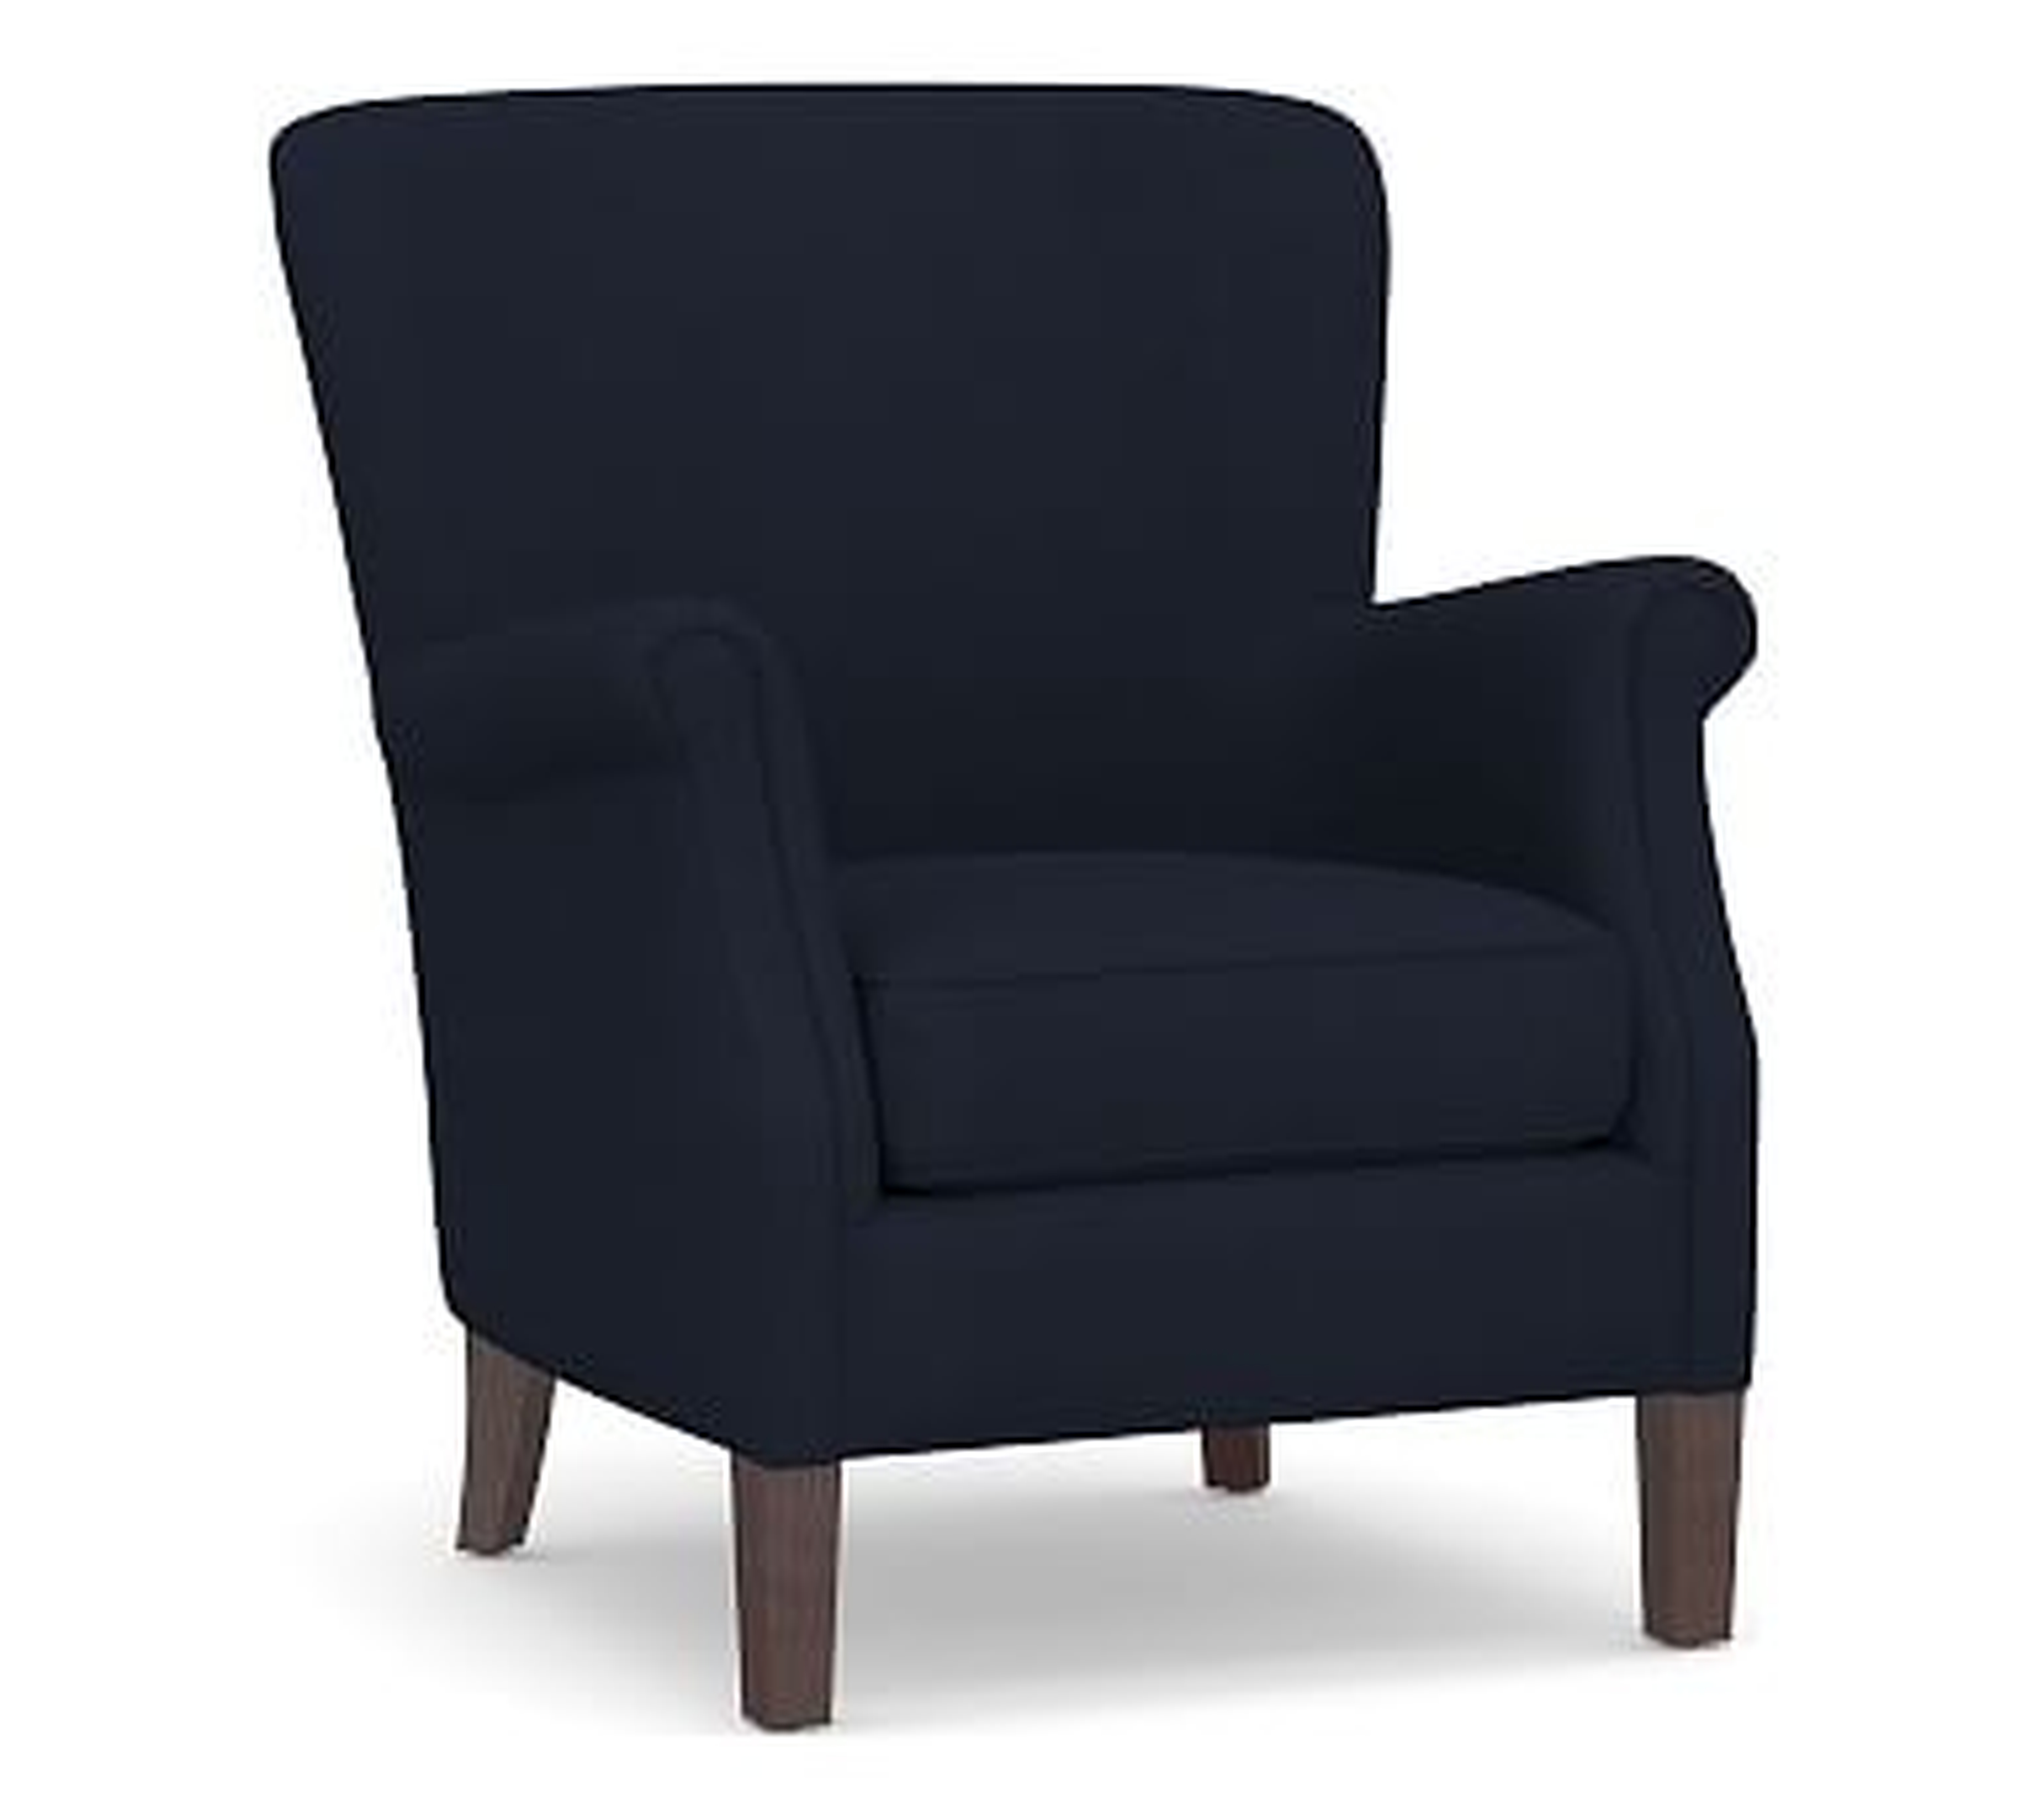 SoMa Minna Upholstered Armchair, Polyester Wrapped Cushions, Twill Cadet Navy - Pottery Barn